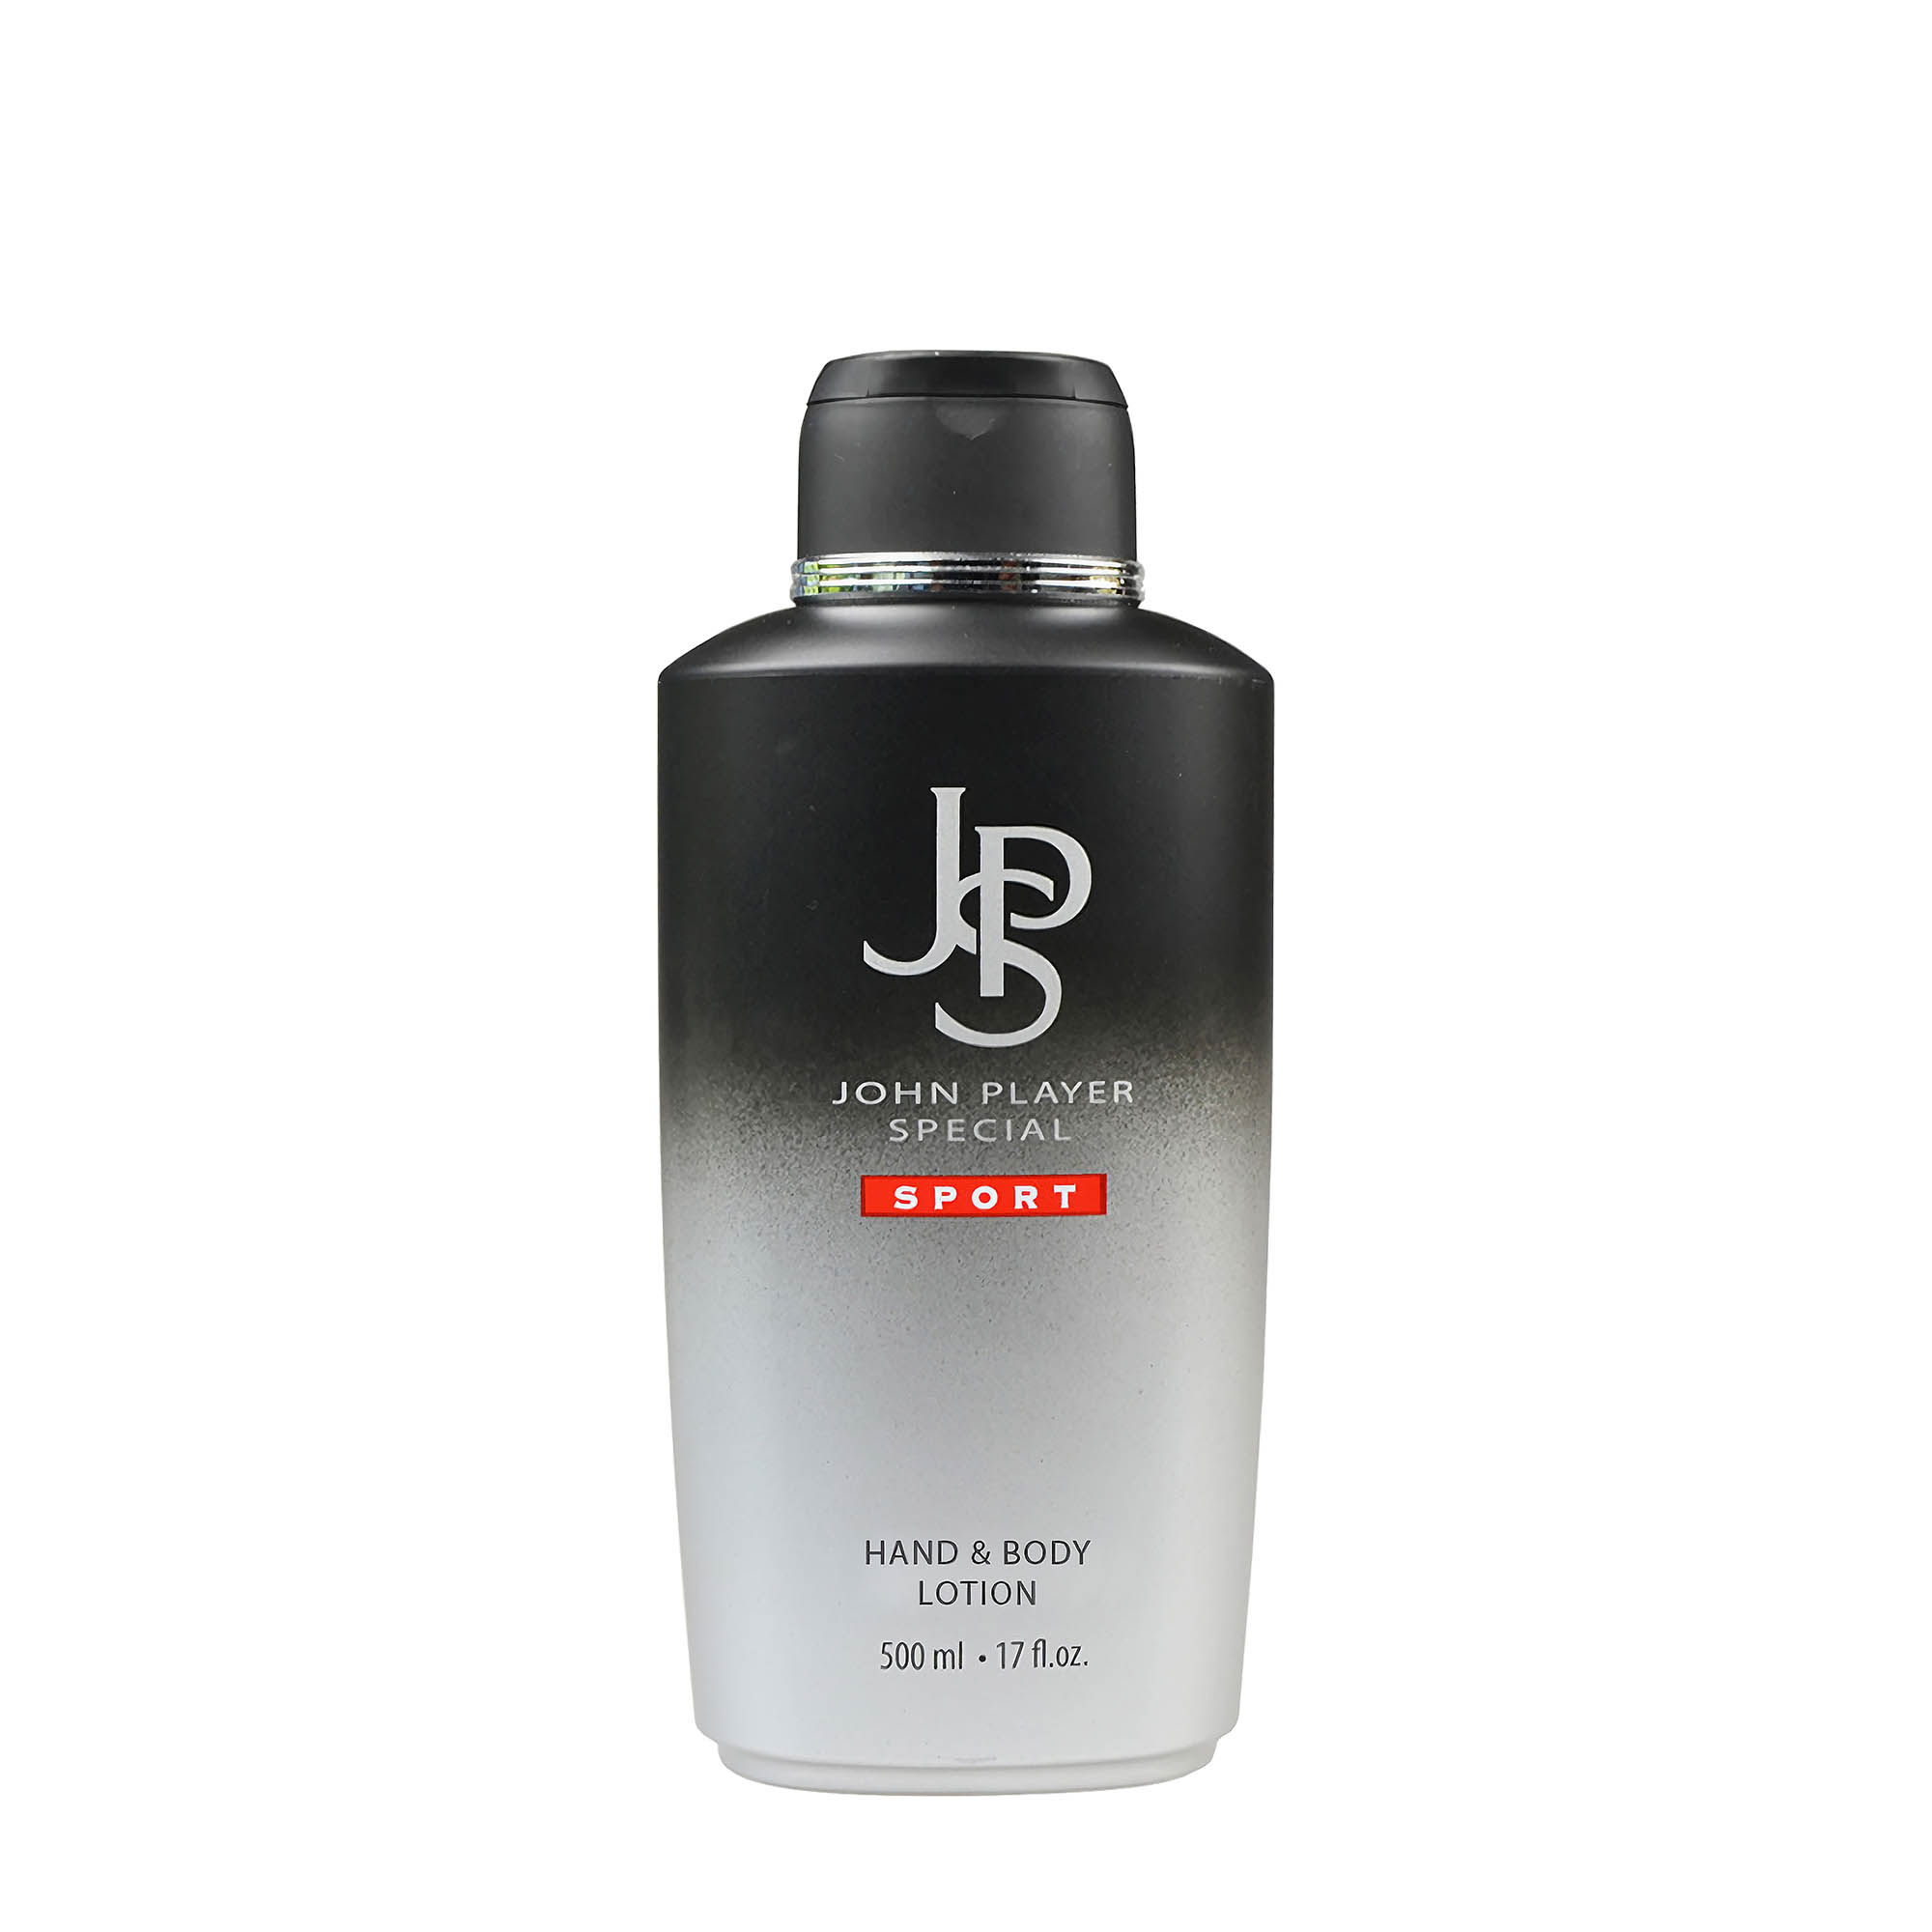 john player special hand body lotion sport 500ml